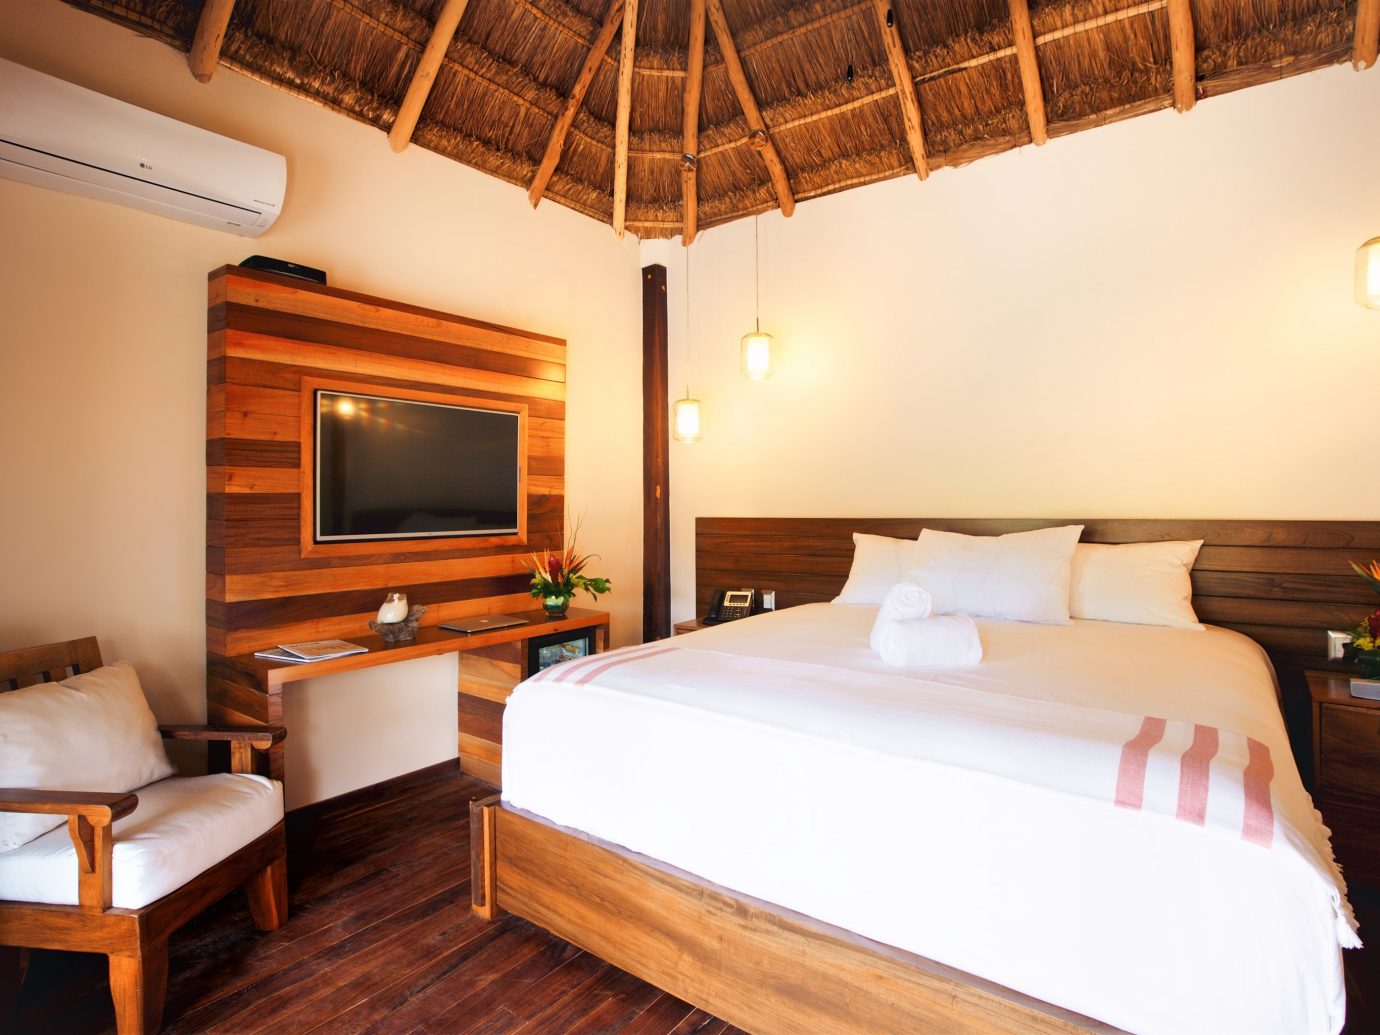 Boutique Hotels Hotels Mexico Tulum indoor wall floor bed room Bedroom Suite ceiling hotel boarding house real estate interior design furniture estate wood